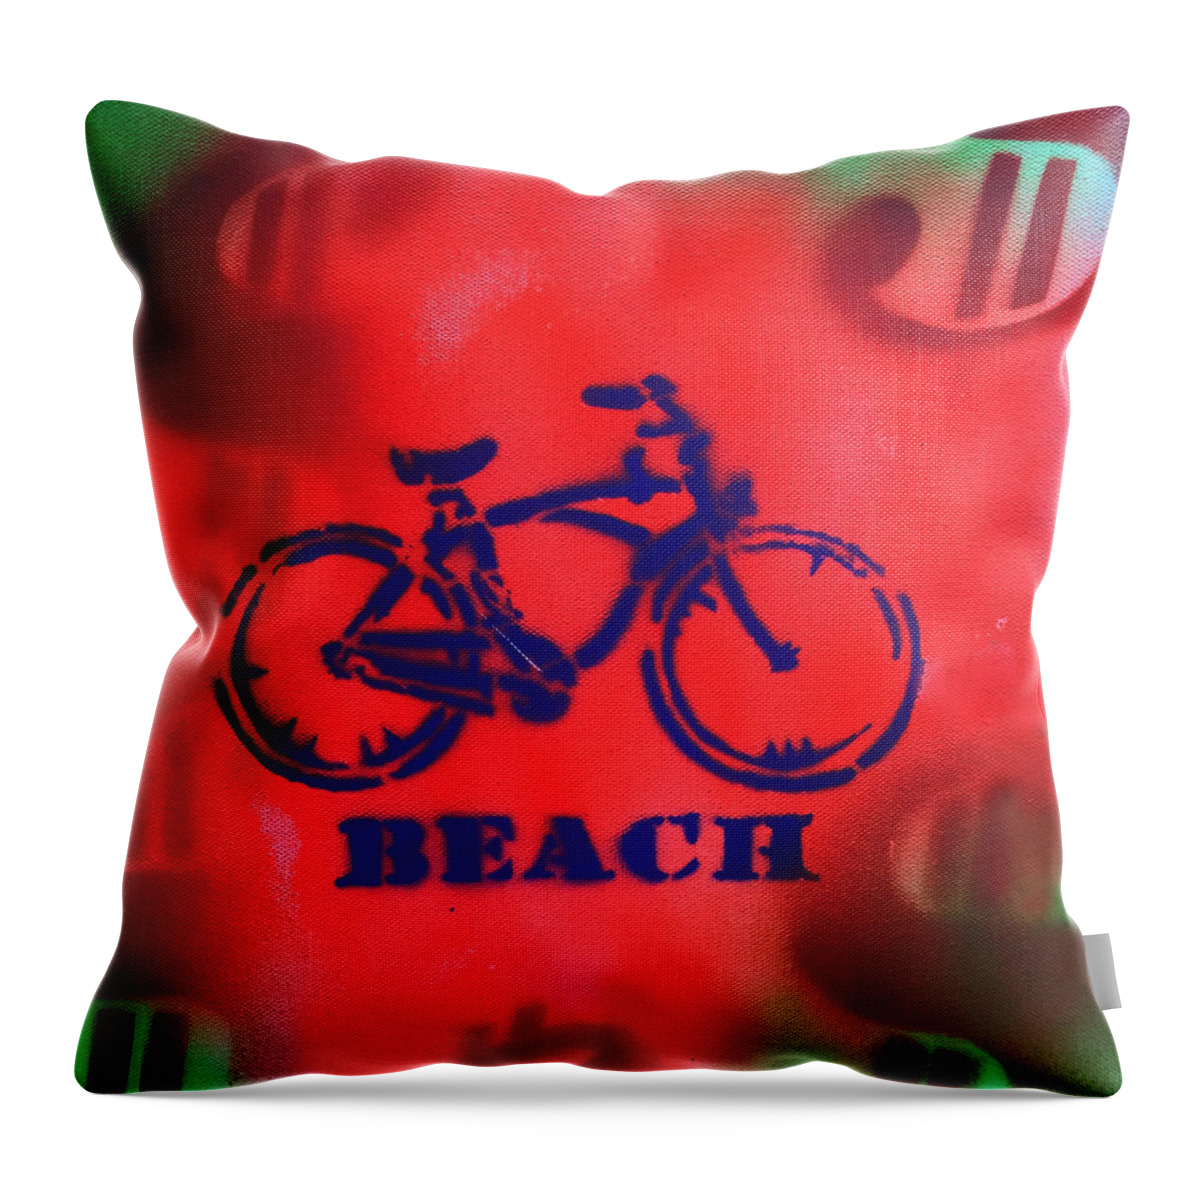 Beach Throw Pillow featuring the painting Beach Money by Robert E. Rodriguez by Robert R Splashy Art Abstract Paintings